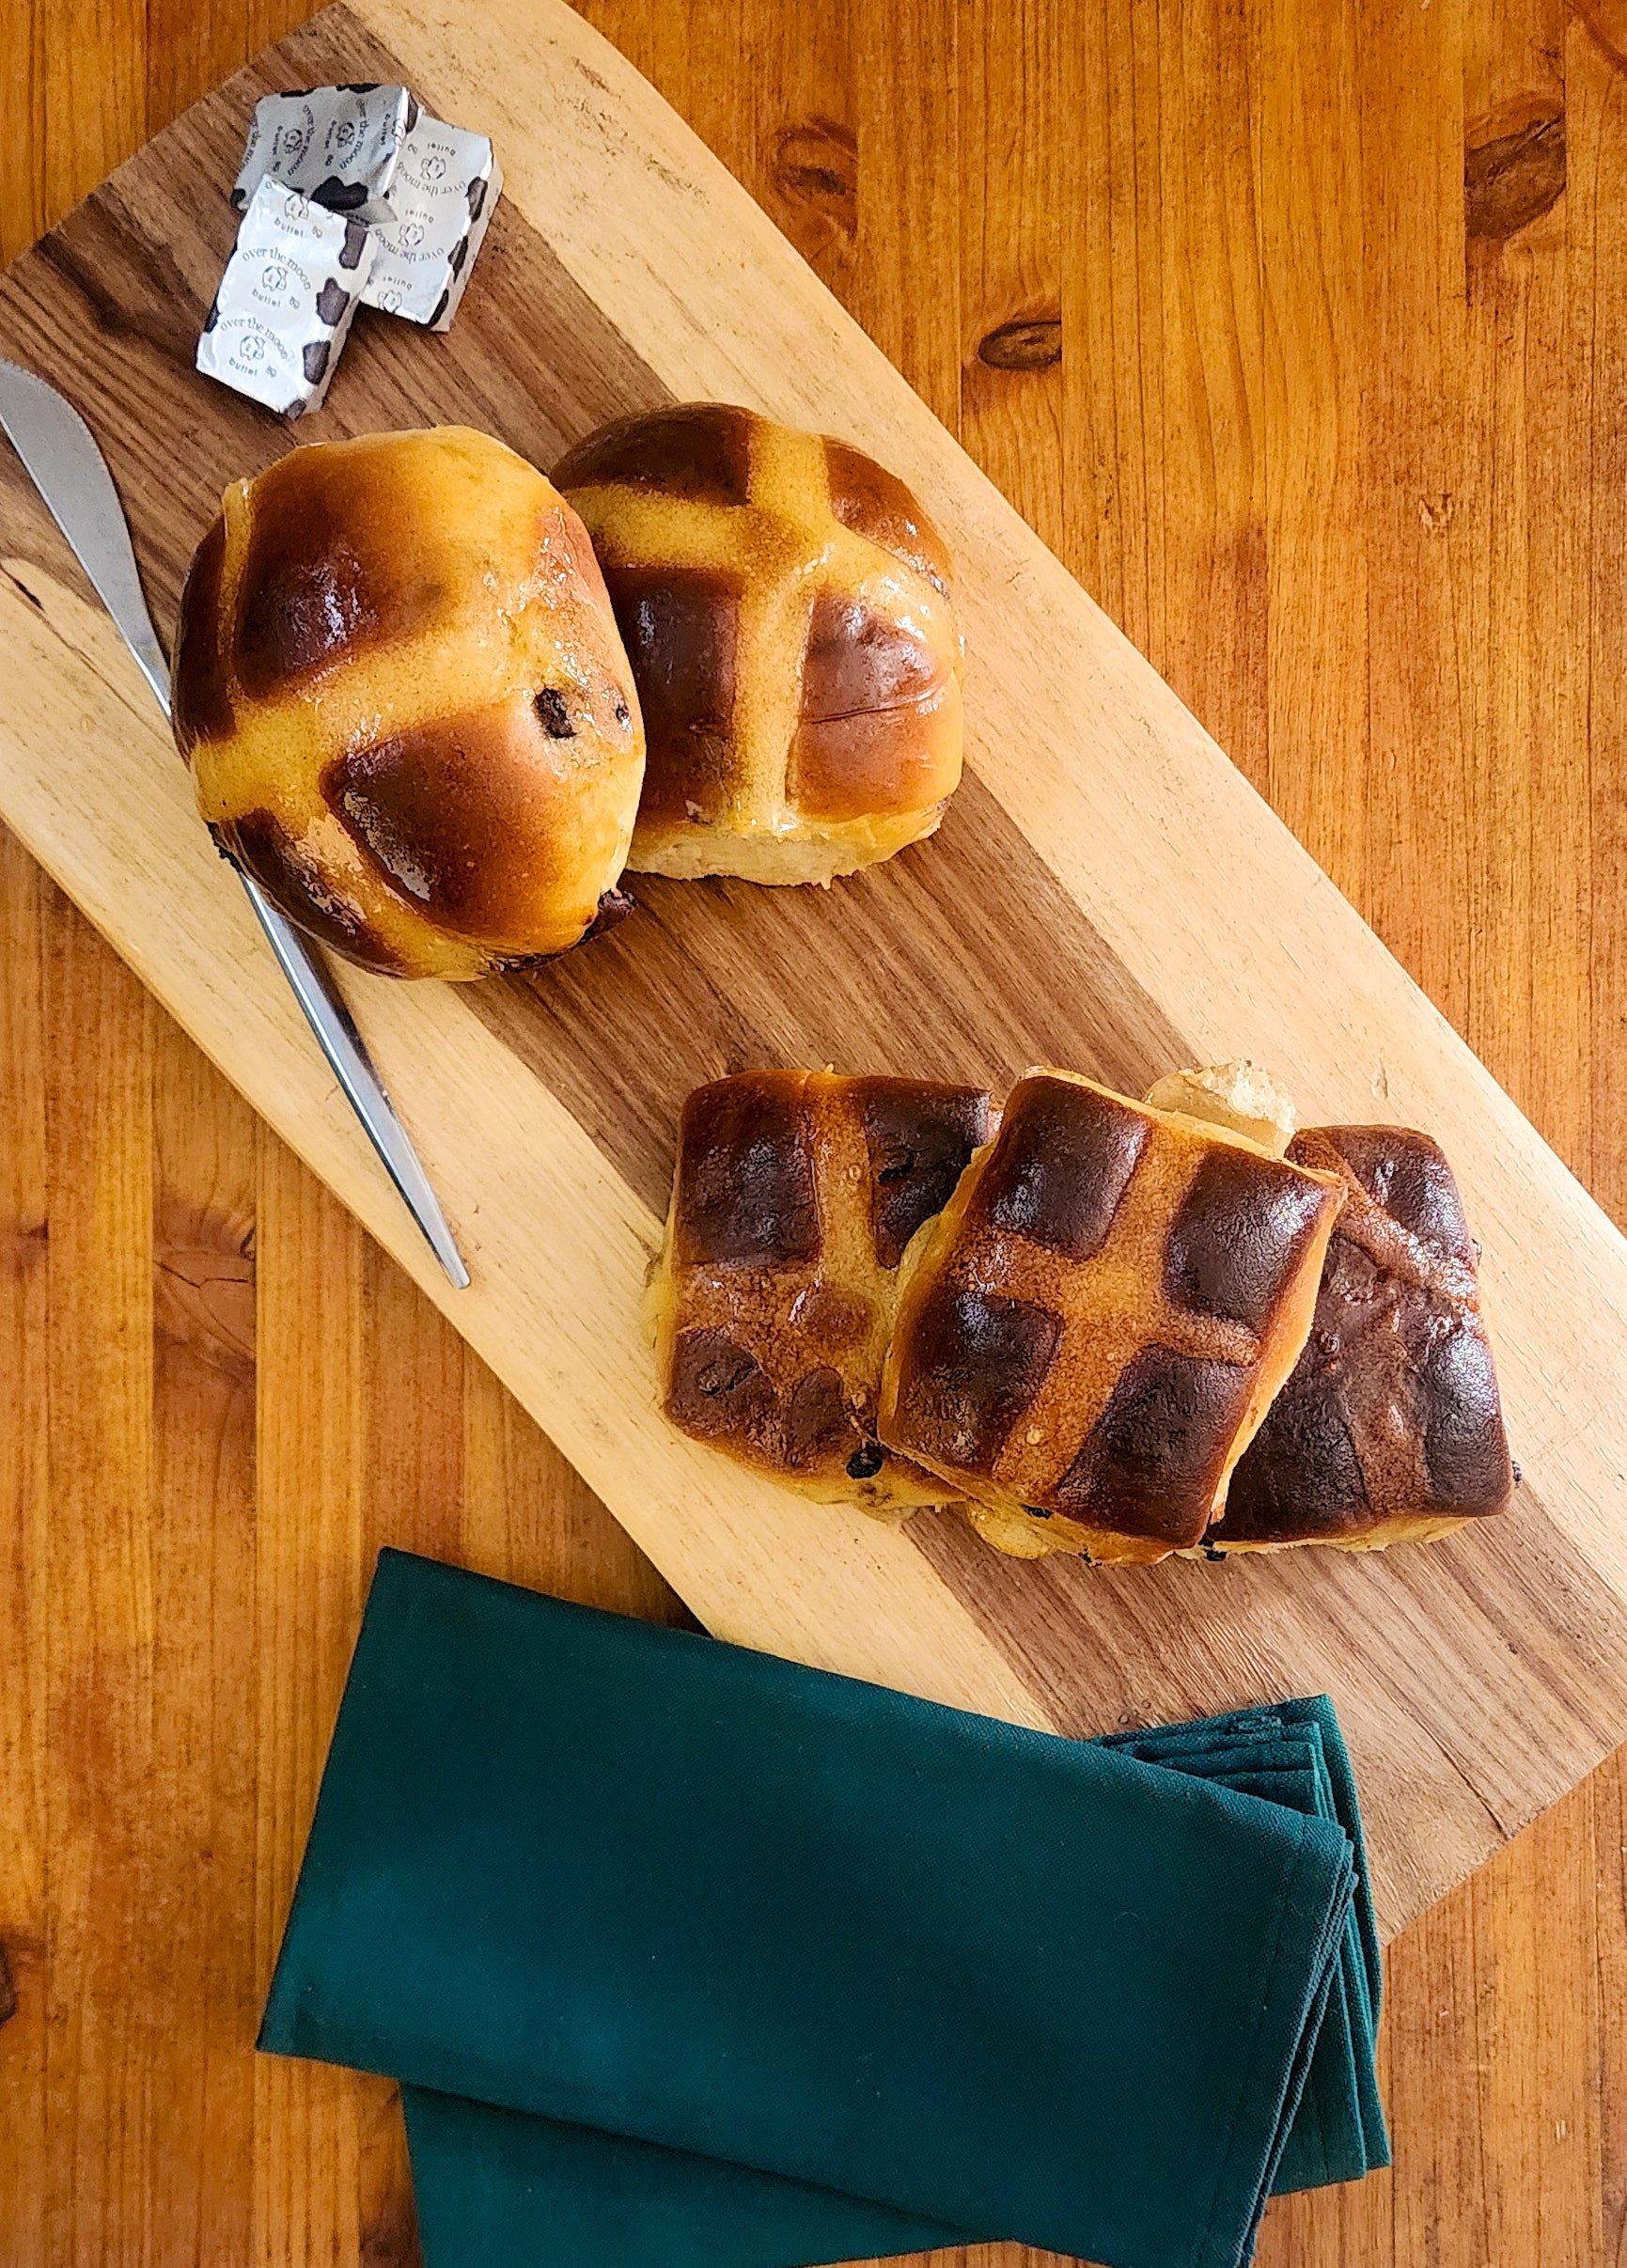 HOT CROSS BUNS - Includes Fruit Mix SPICED